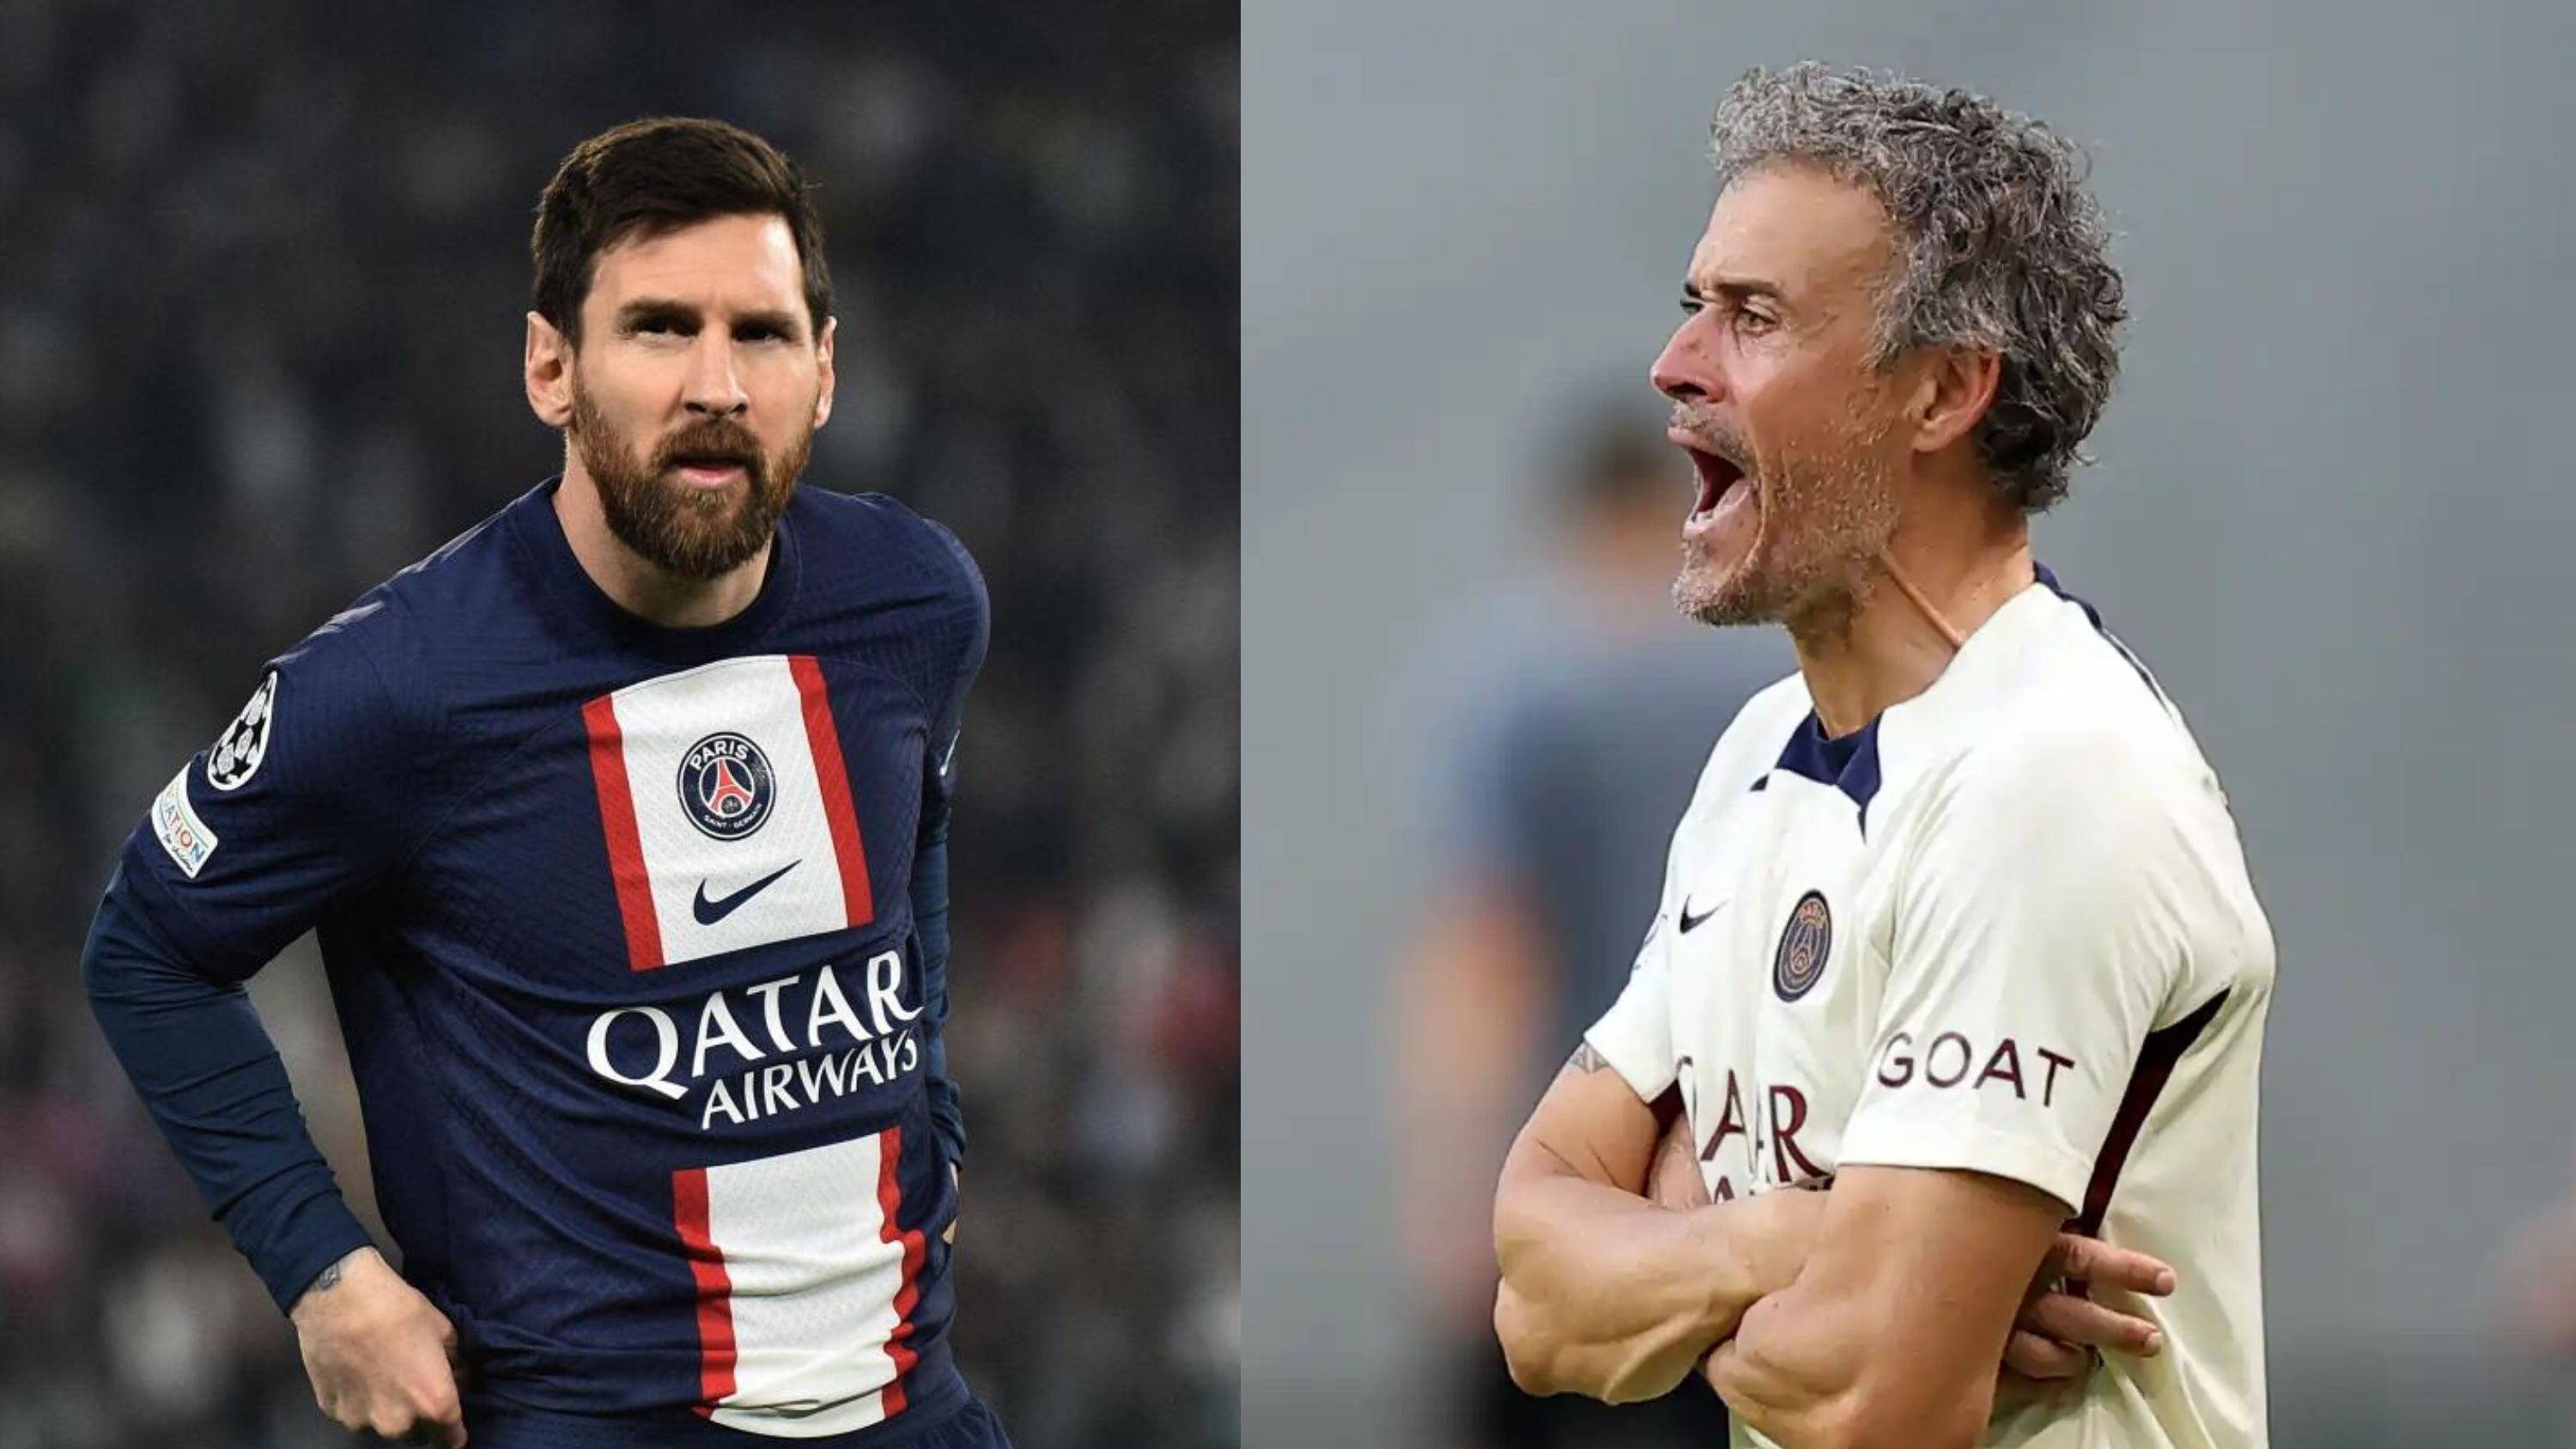 He was one of Messi's best teammates at PSG, now he will play in Qatar